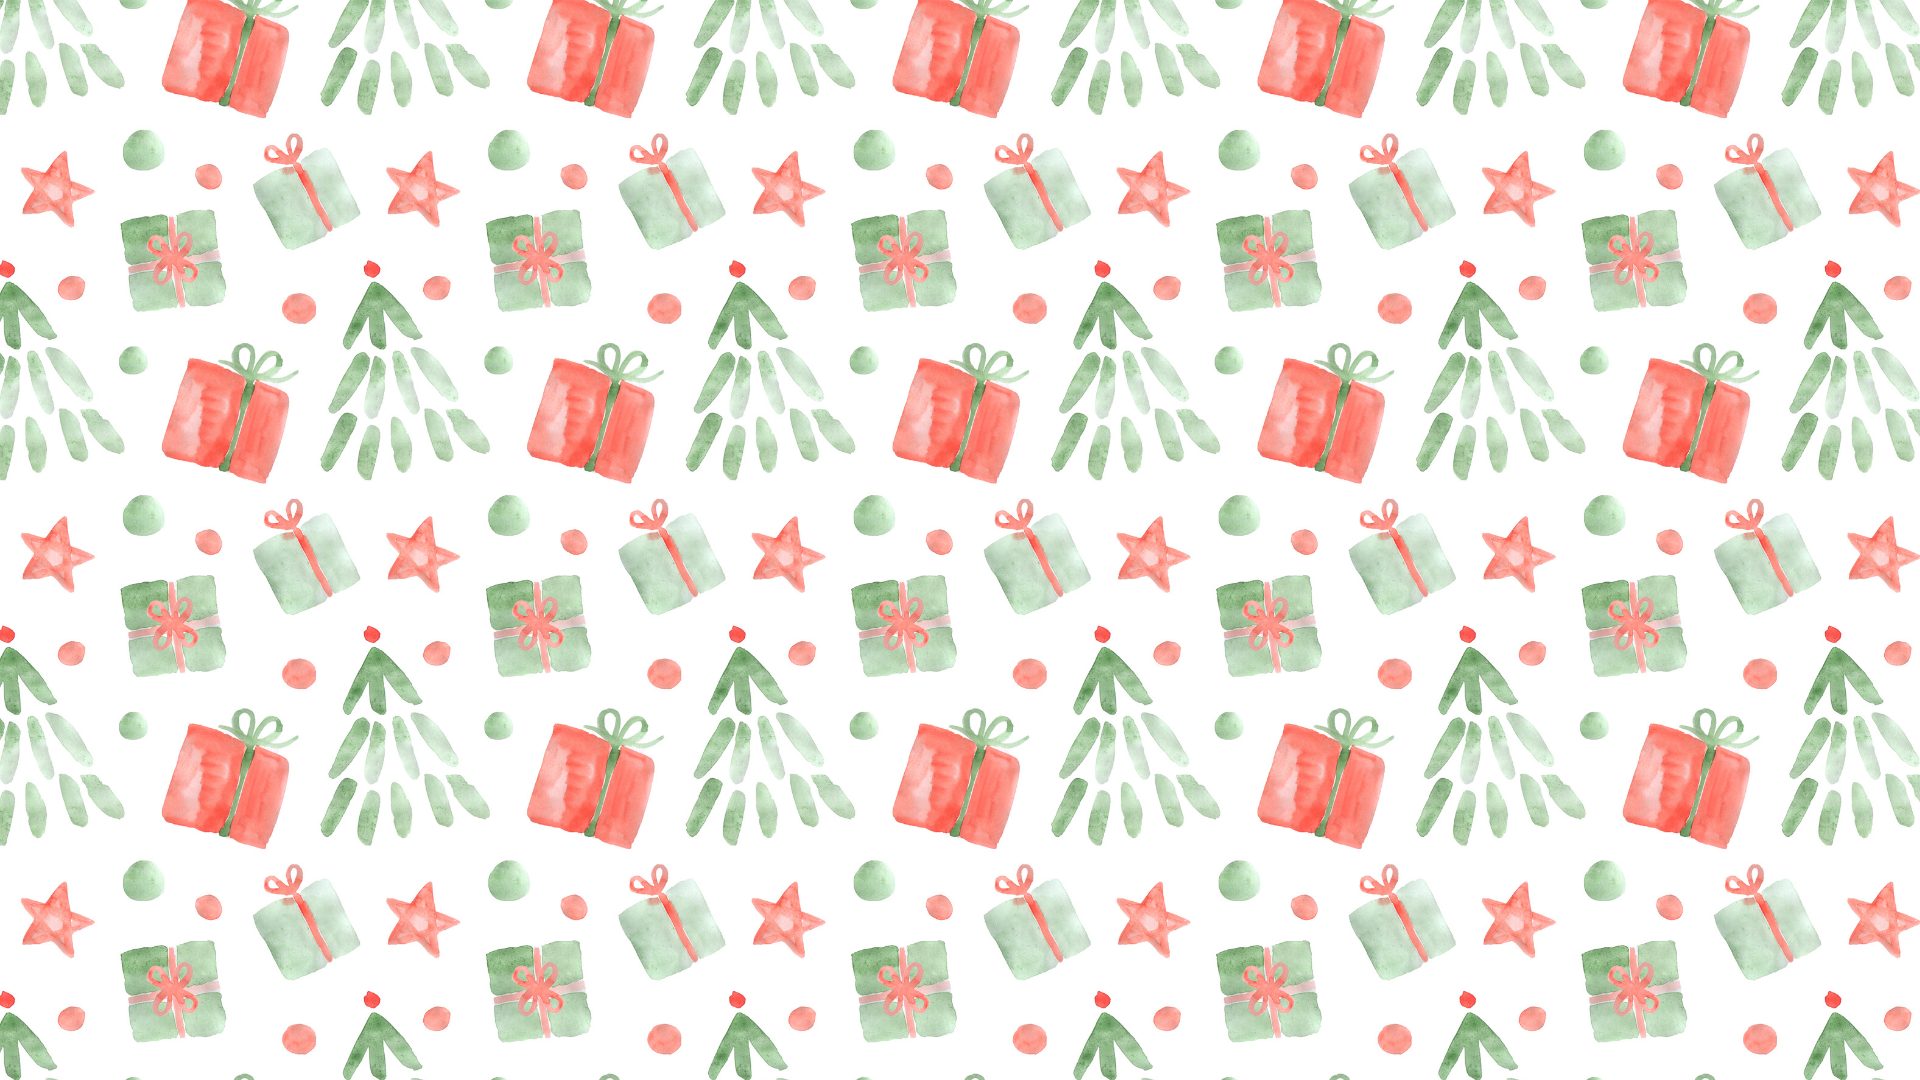 Pastel Aesthetic Christmas Wallpaper; here are 20 desktop backgrounds  you can use FOR FREE! Holiday tech backgrounds!